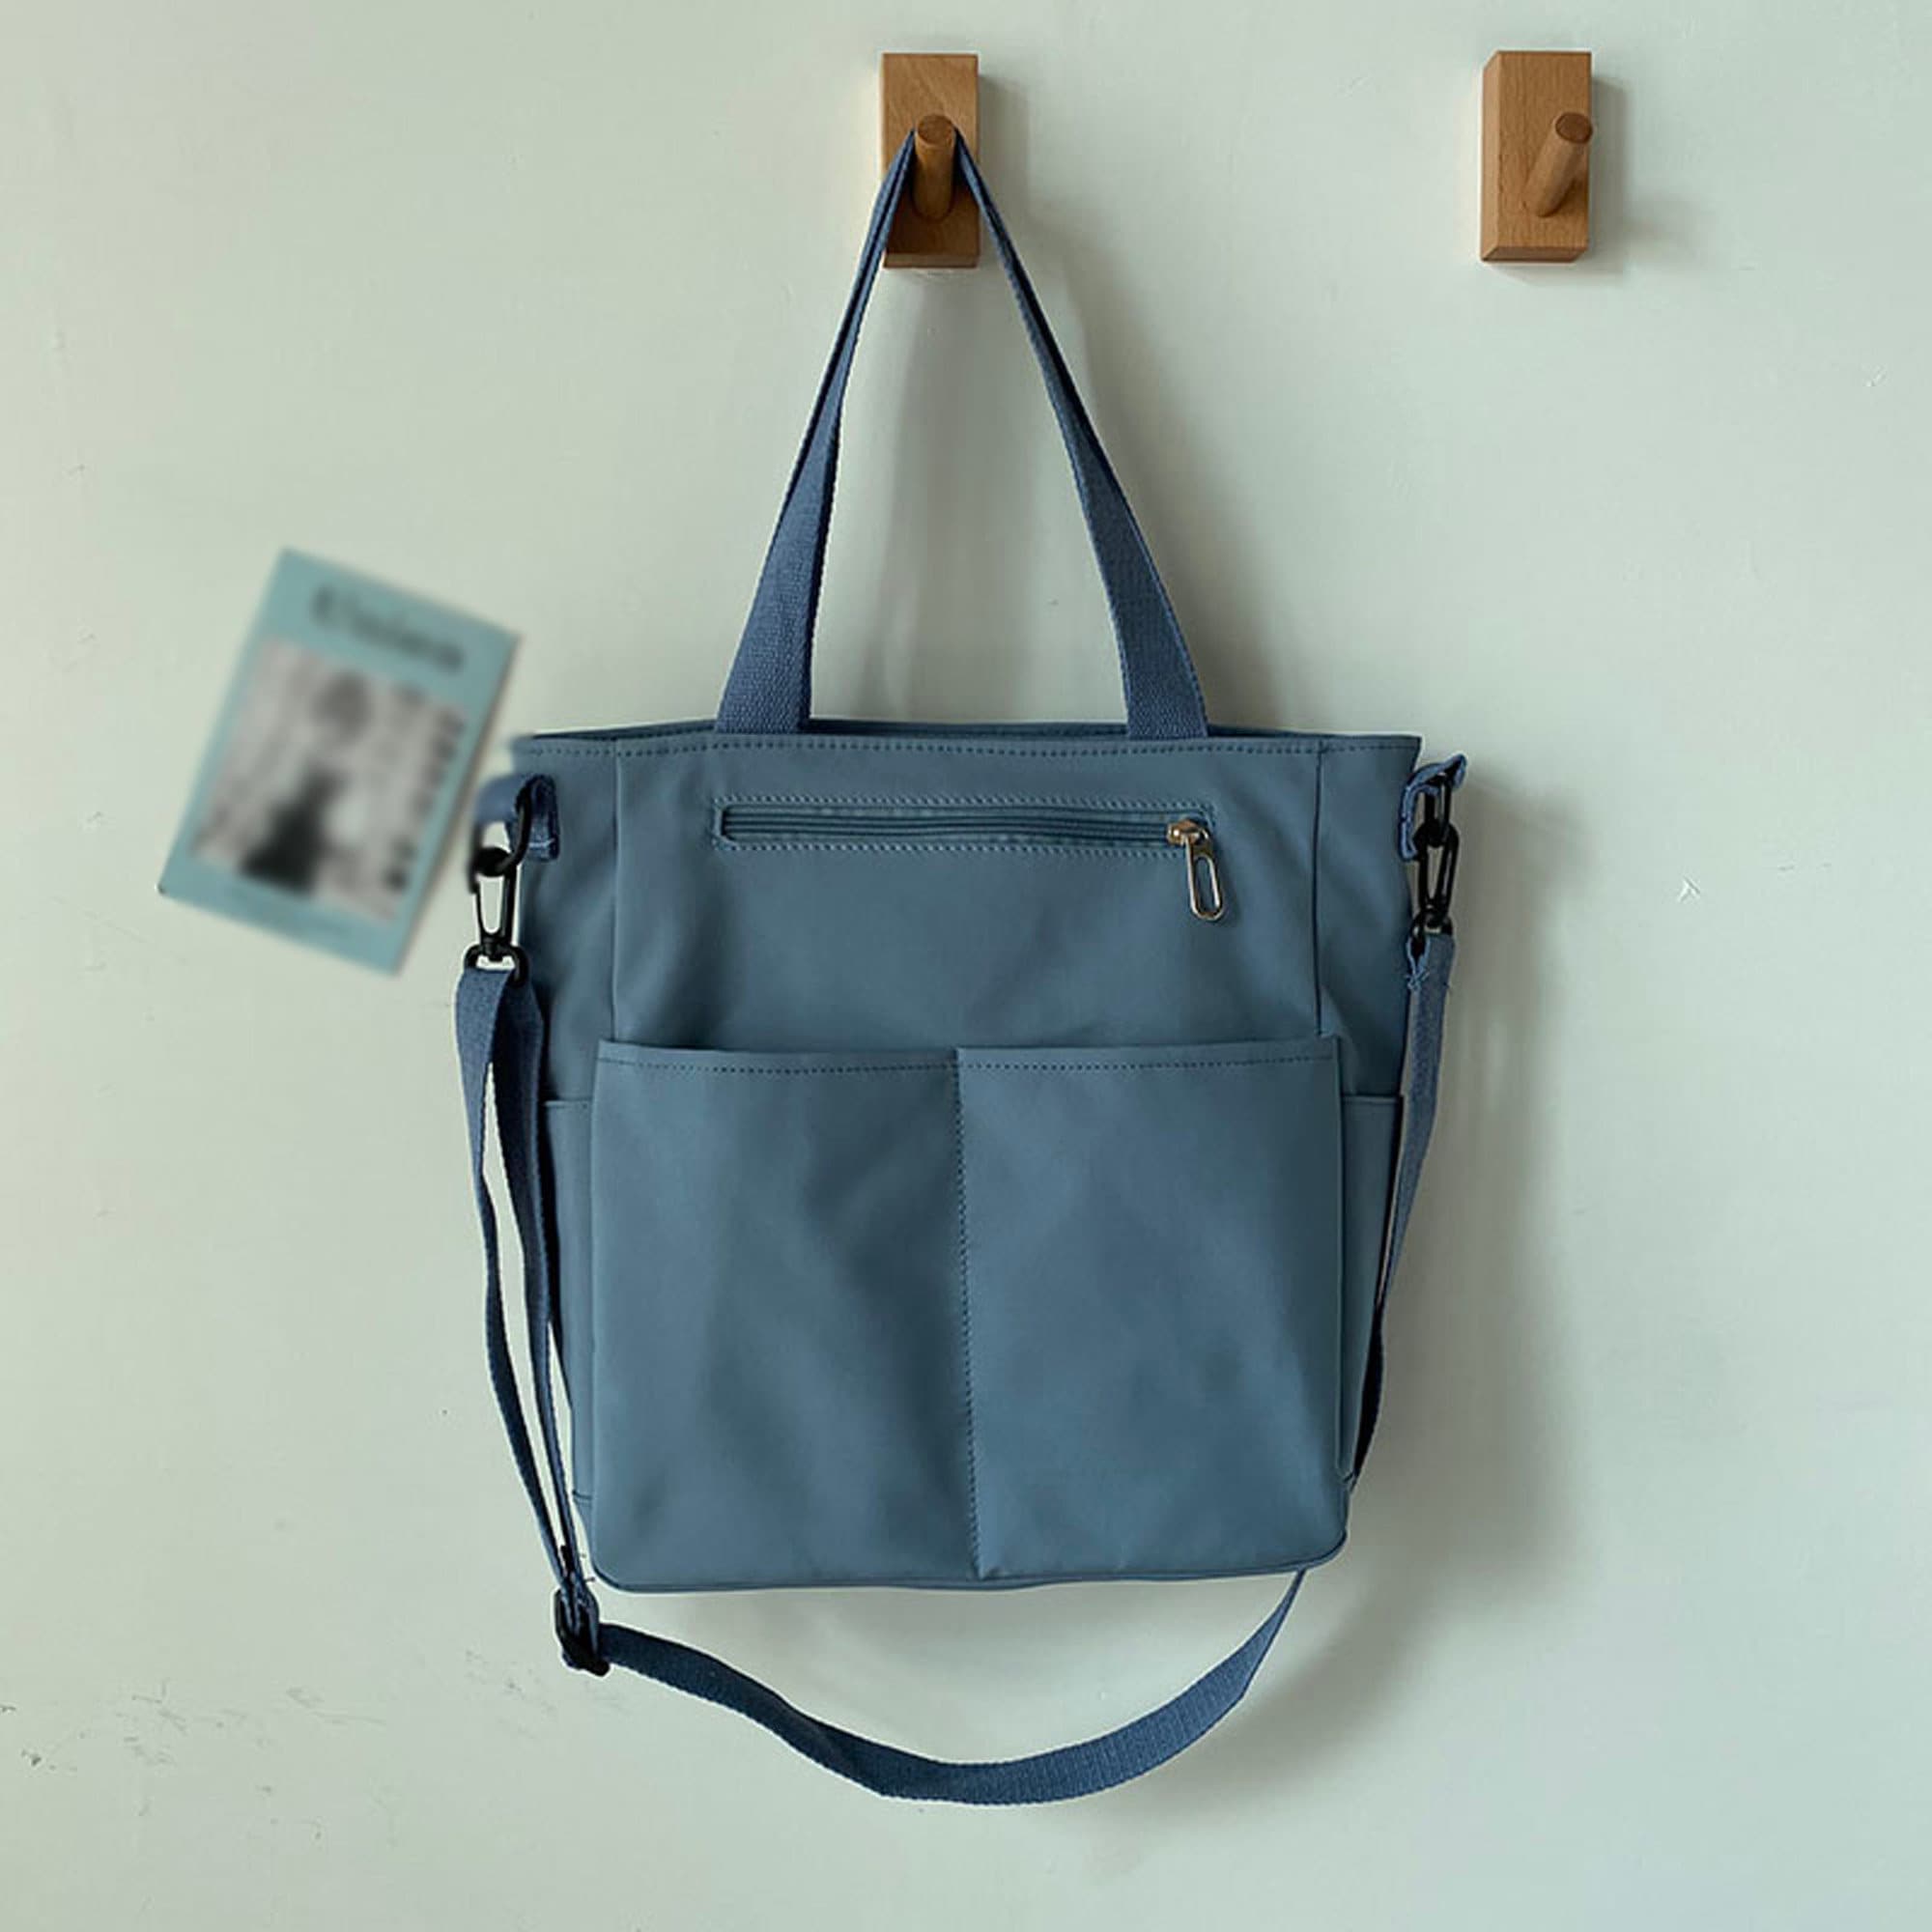 Blue Work Bag, Casual Work Tote Bag, Canvas Waterproof Tote Bag, Laptop Tote Bag, Work Tote Bag for Women, Work & School, Best Gift for Her